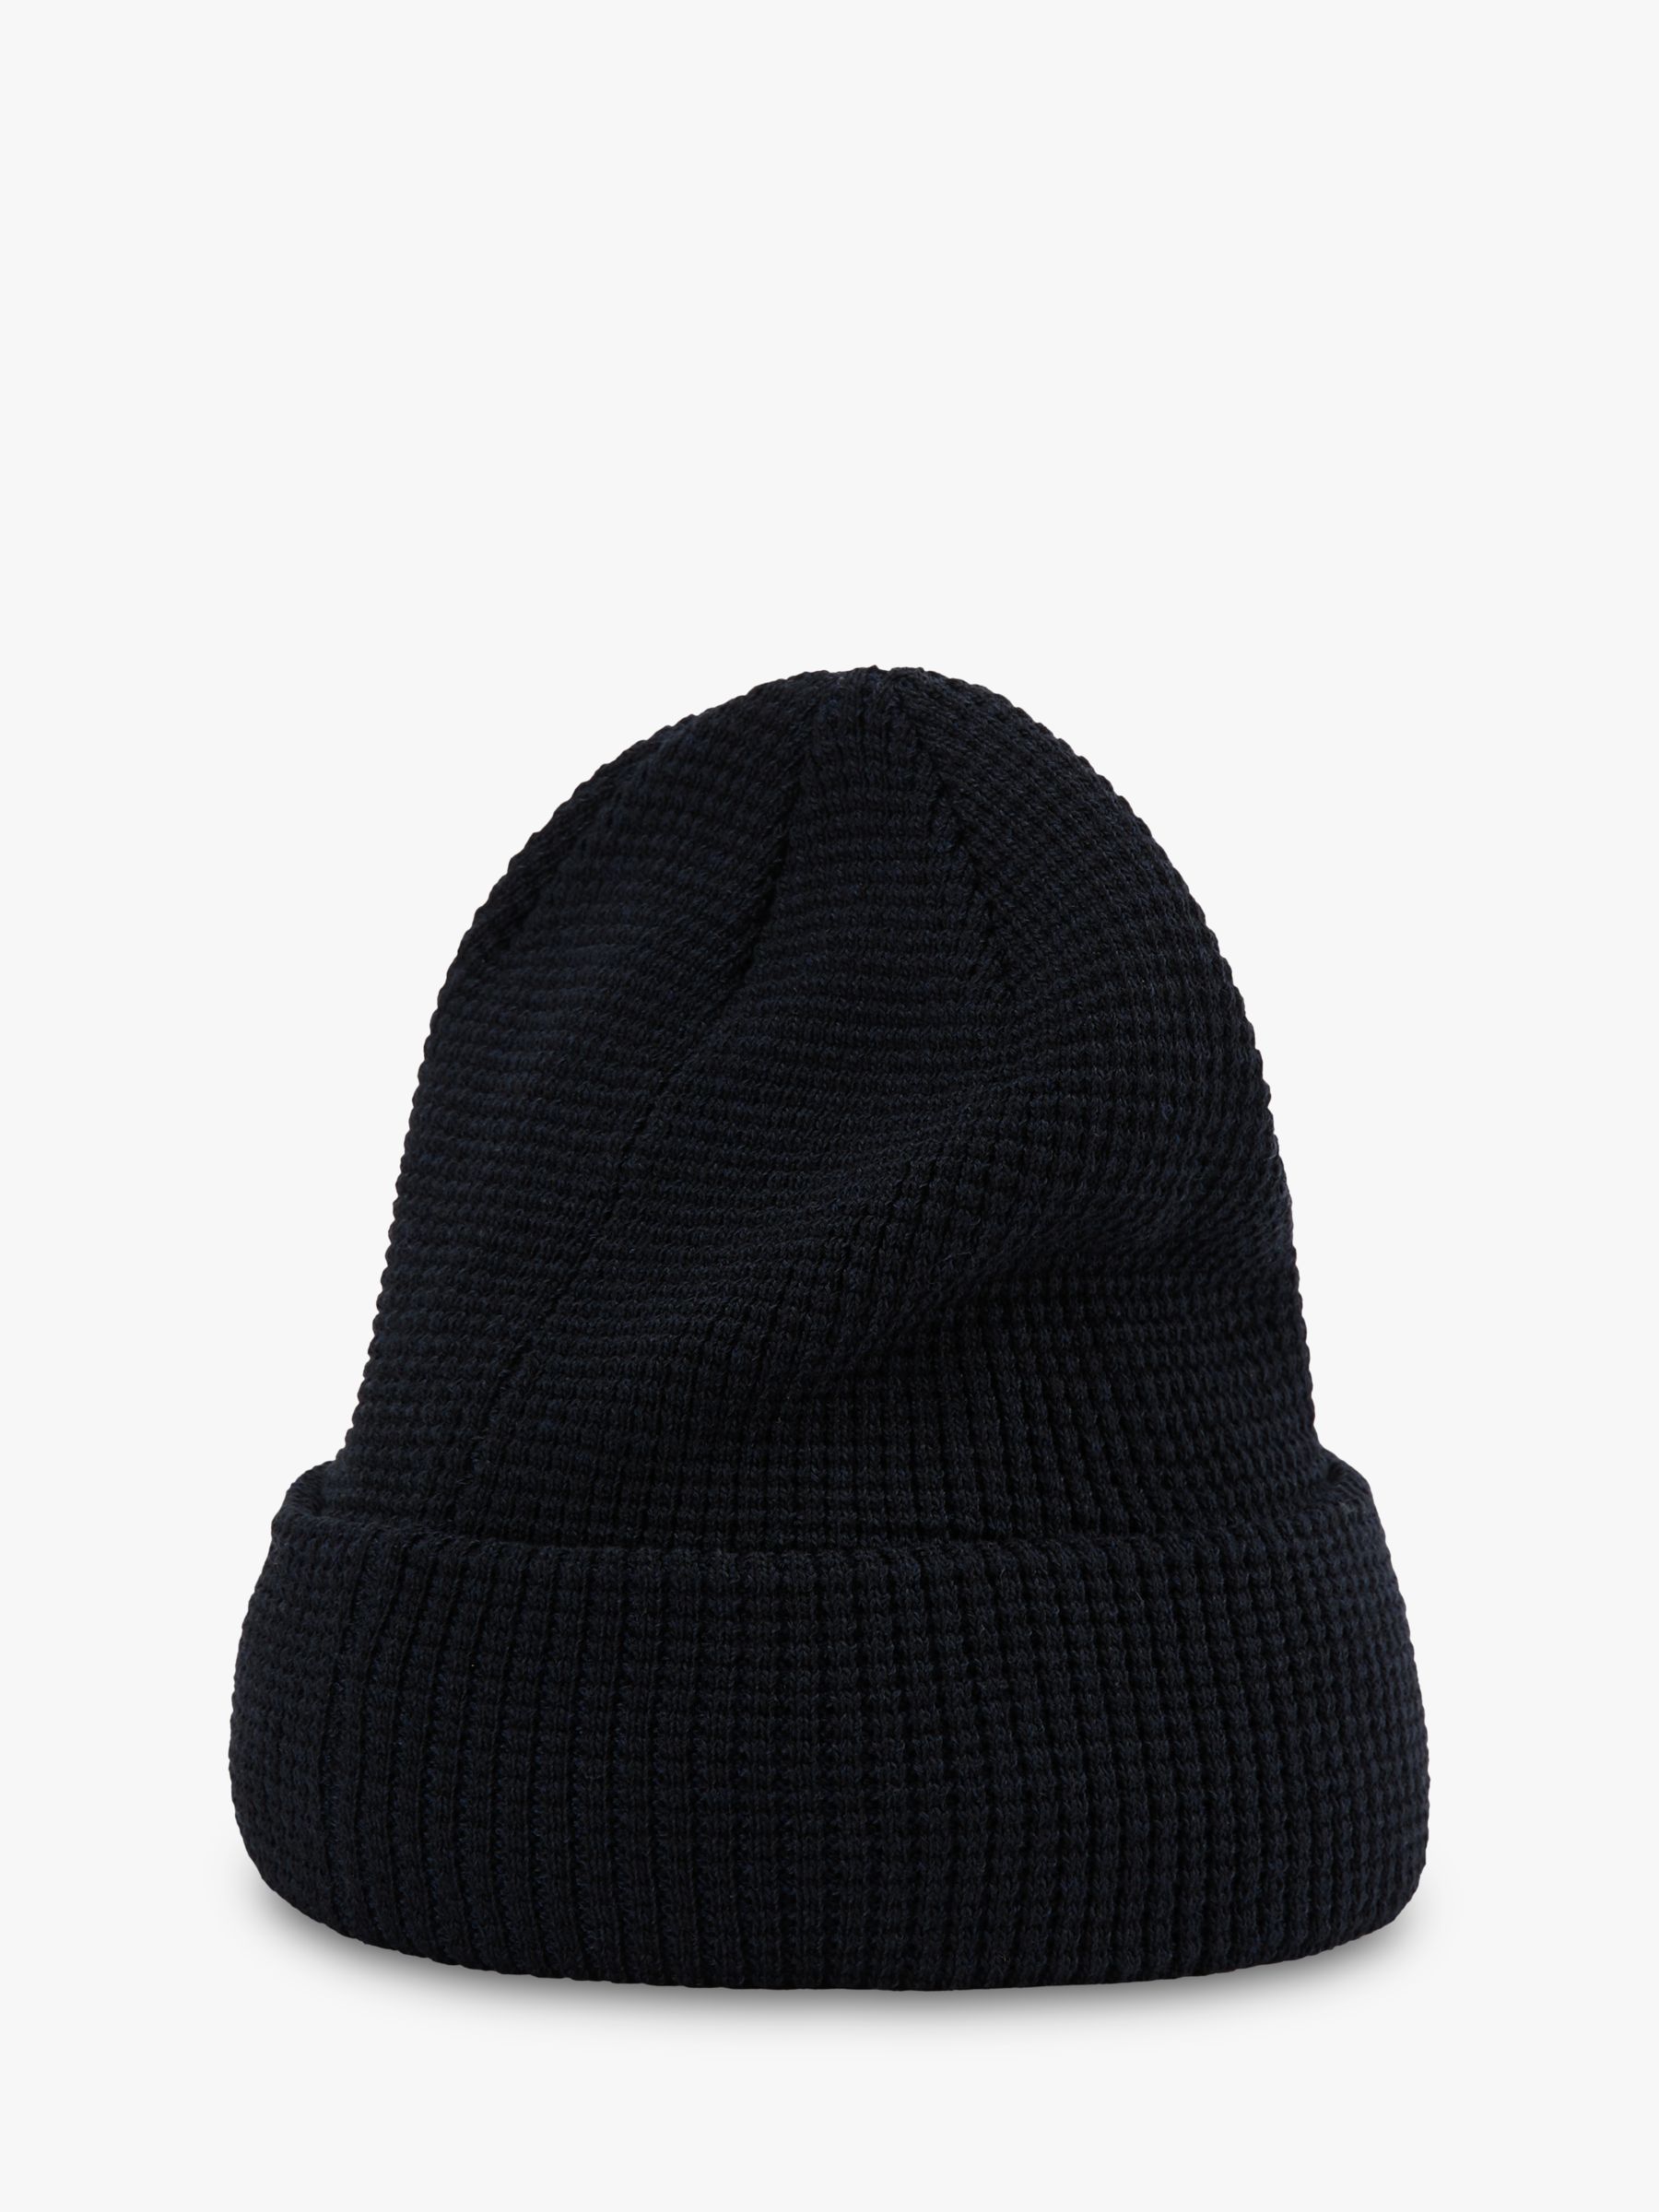 Buy Haglöfs Top Out Beanie Online at johnlewis.com